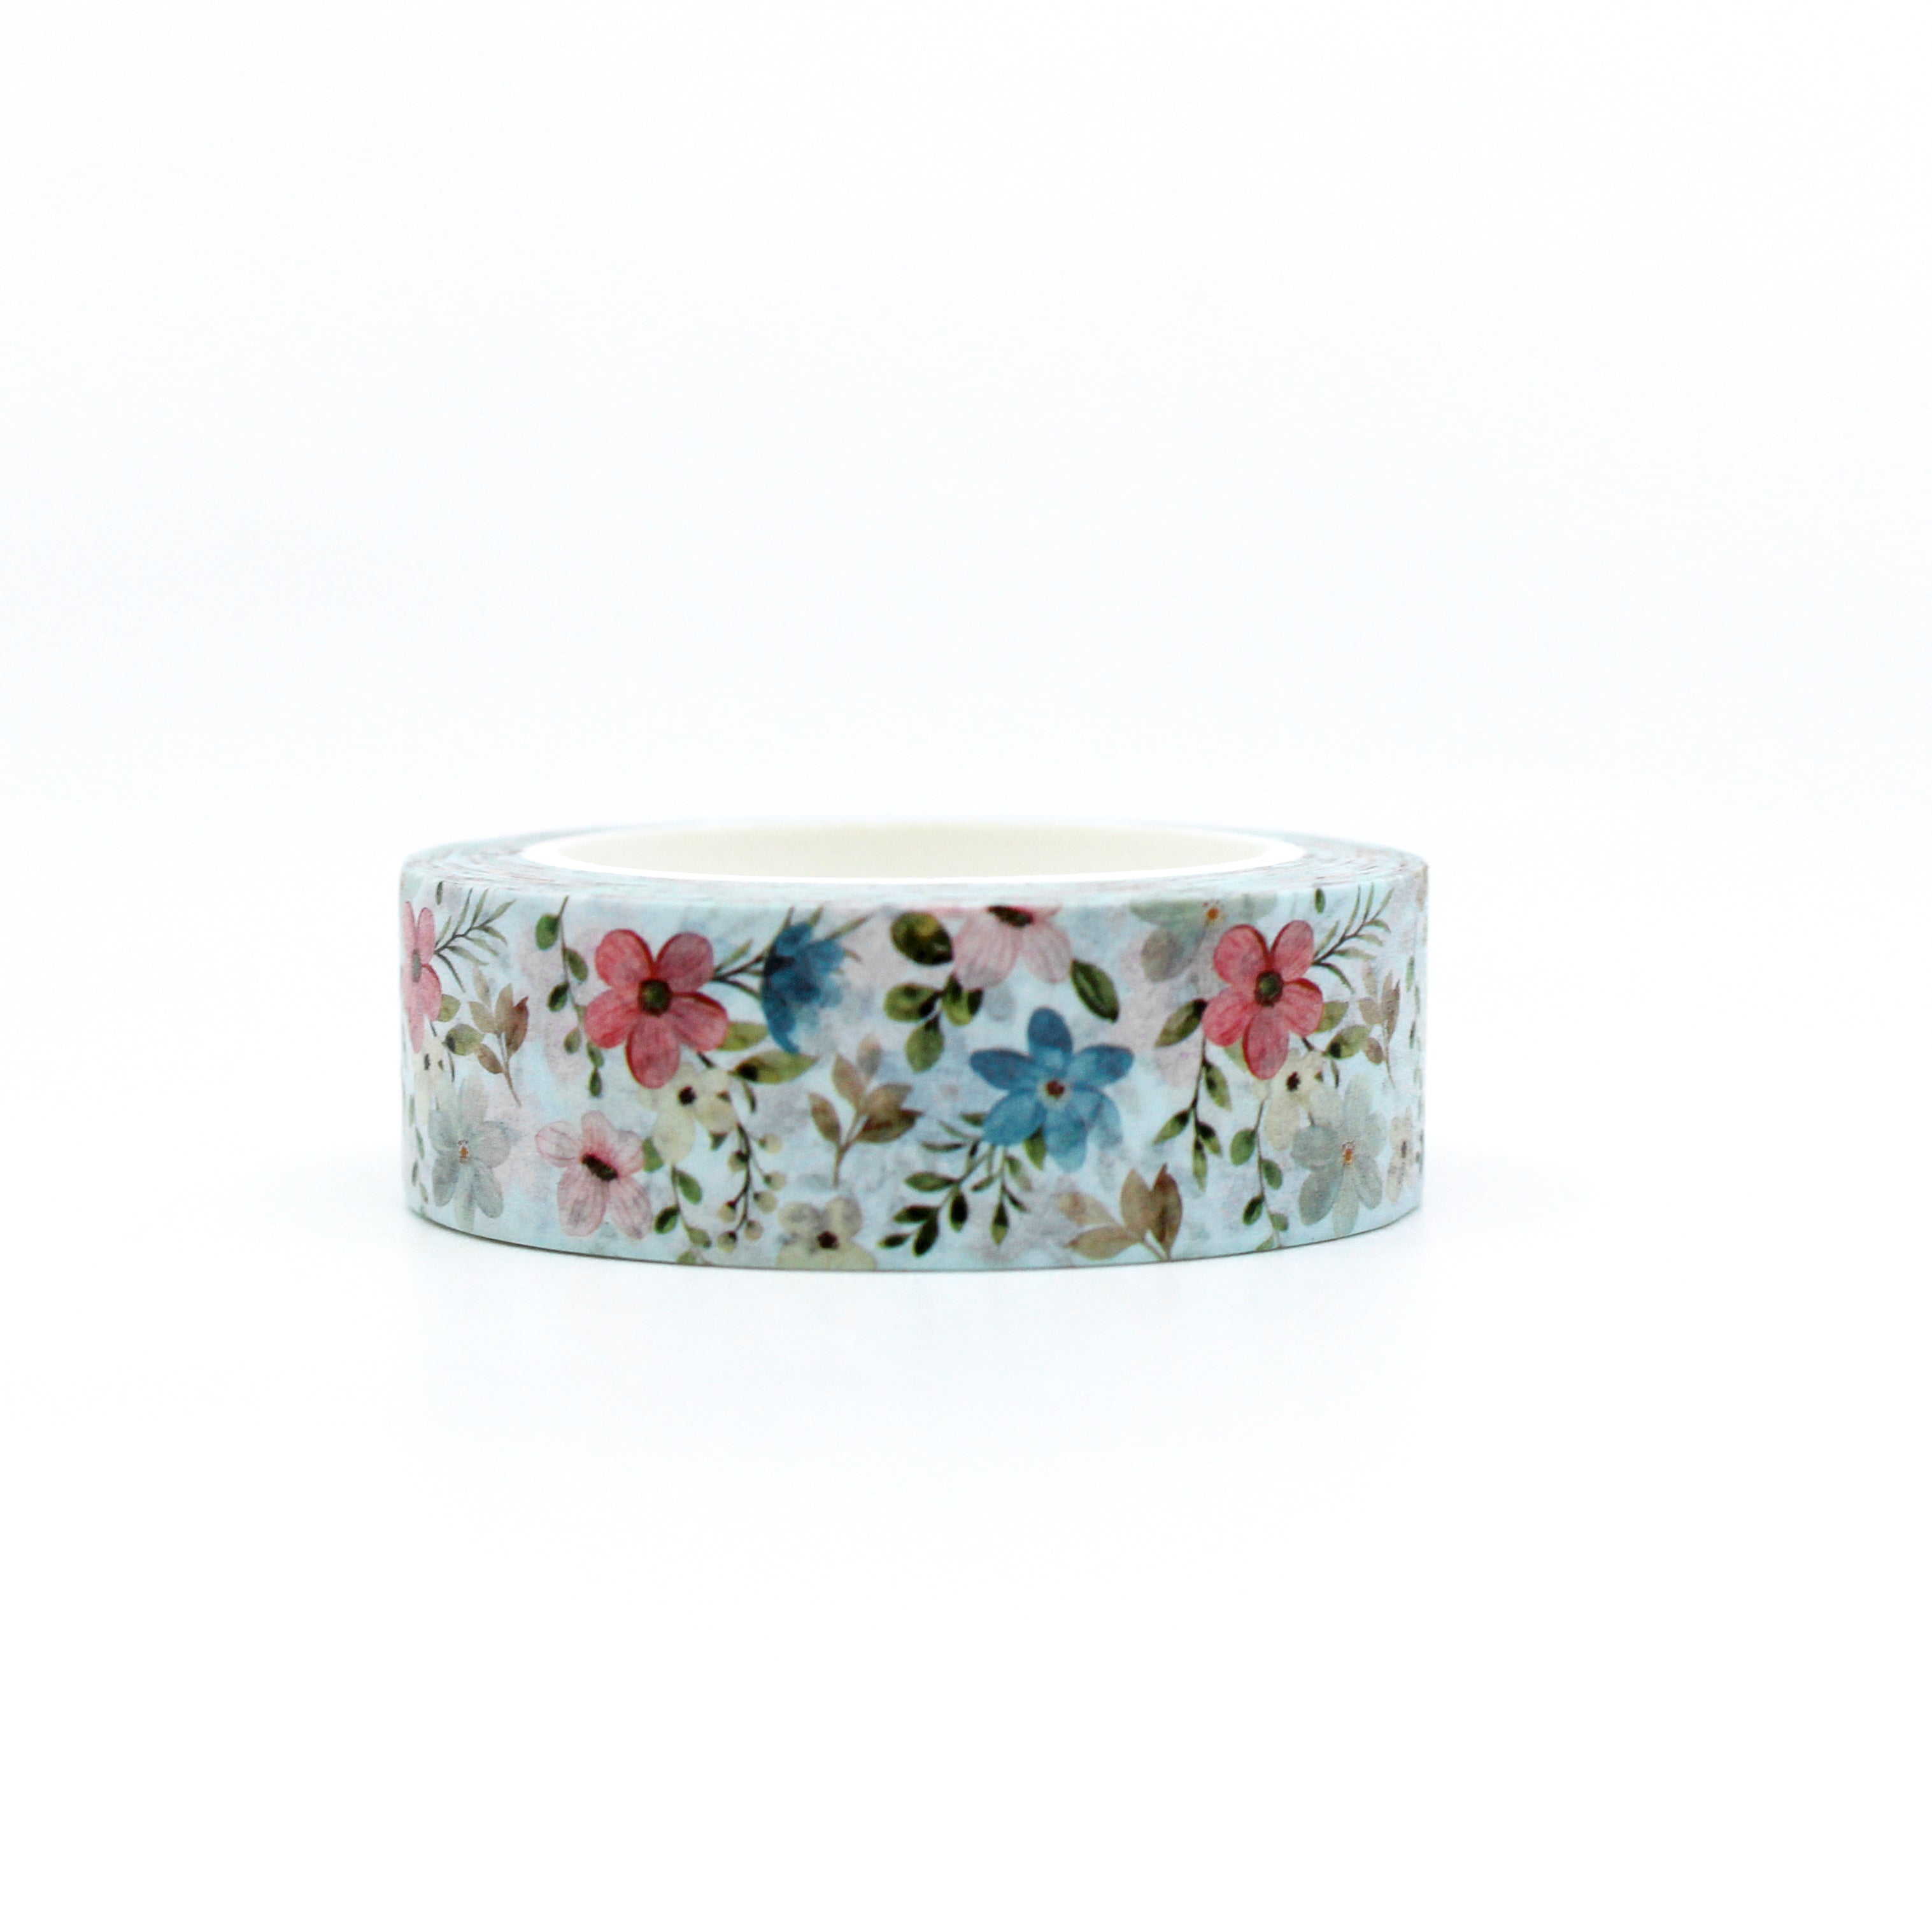  Spring Blue Floral Washi Tape: Bring the beauty of spring to your crafts with our Blue Floral Washi Tape. Featuring delicate blue flowers on a white background, this tape is perfect for adding a touch of elegance to your projects. Whether you're scrapbooking memories, decorating cards, or embellishing journals, this tape is sure to inspire your creativity. This tape is sold at BBB Supplies Craft Shop.